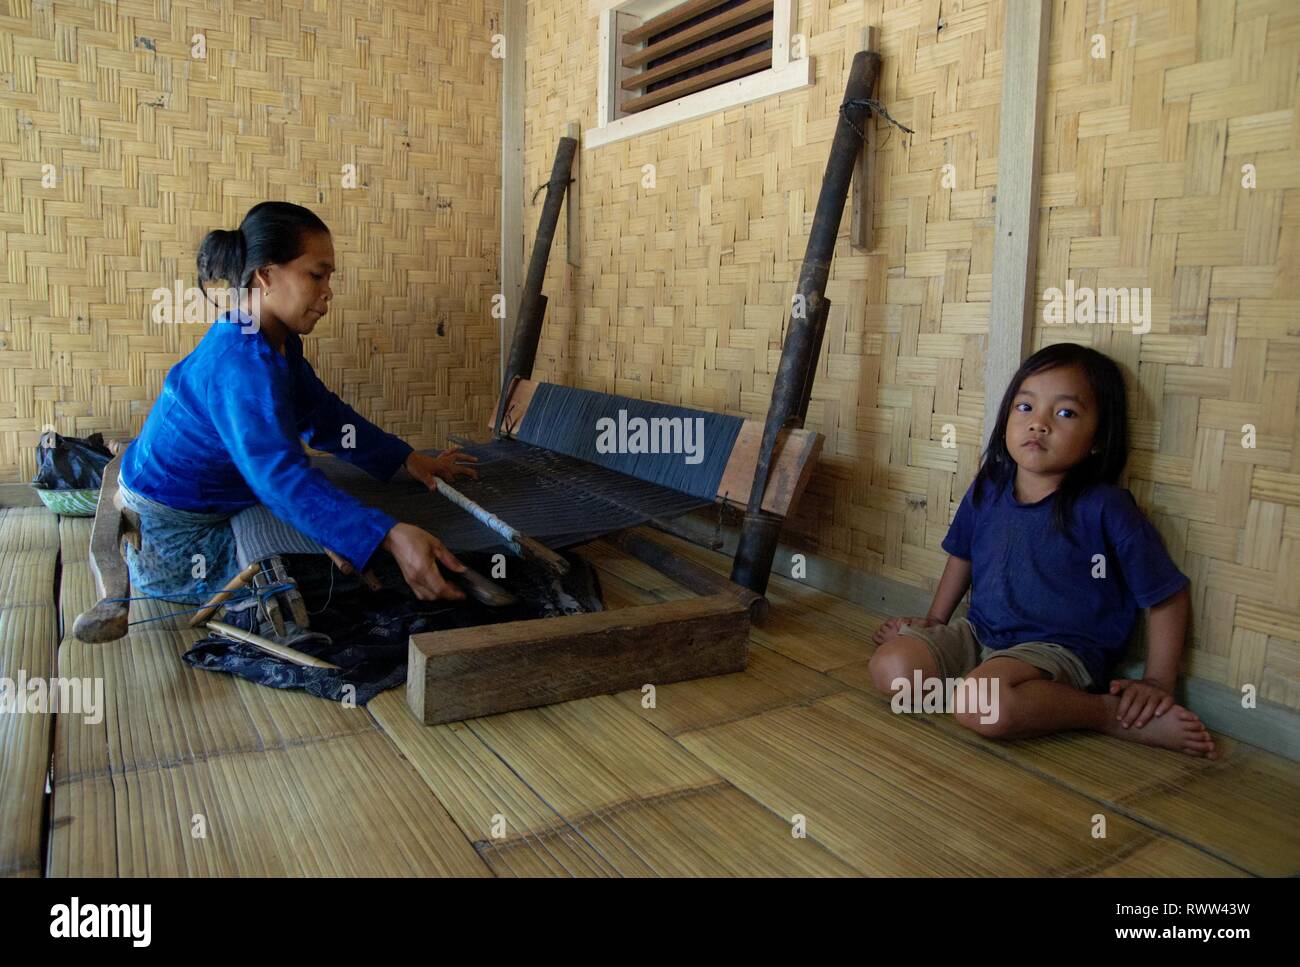 A mother works with her traditional weaving machine, while her daughter are sitting next to her. Location : Baduy, Banten, Indonesia. Stock Photo